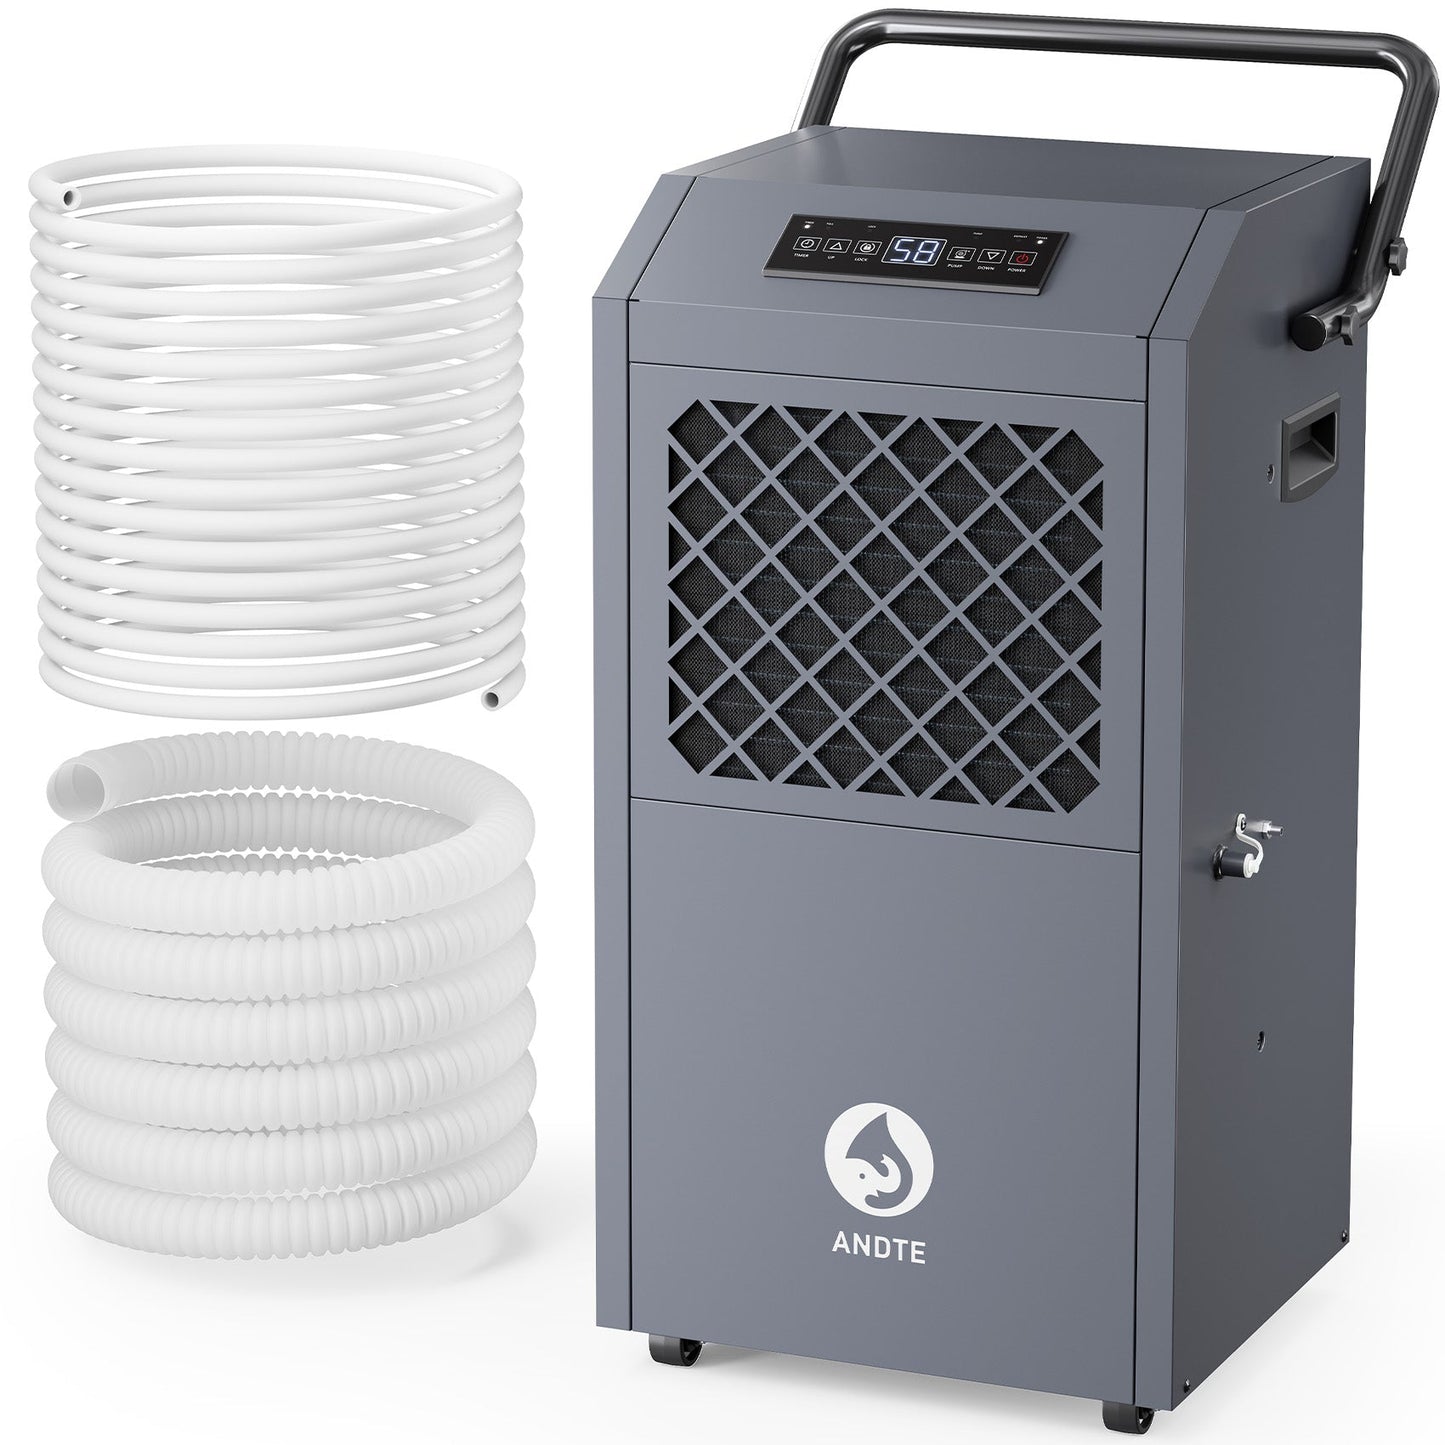 ANDTE 190 Pints Commercial Dehumidifier with Drain Hose, Industrial Dehumidifier for Basements, Garages, and Flood Restoration, Includes 5-Year Warranty